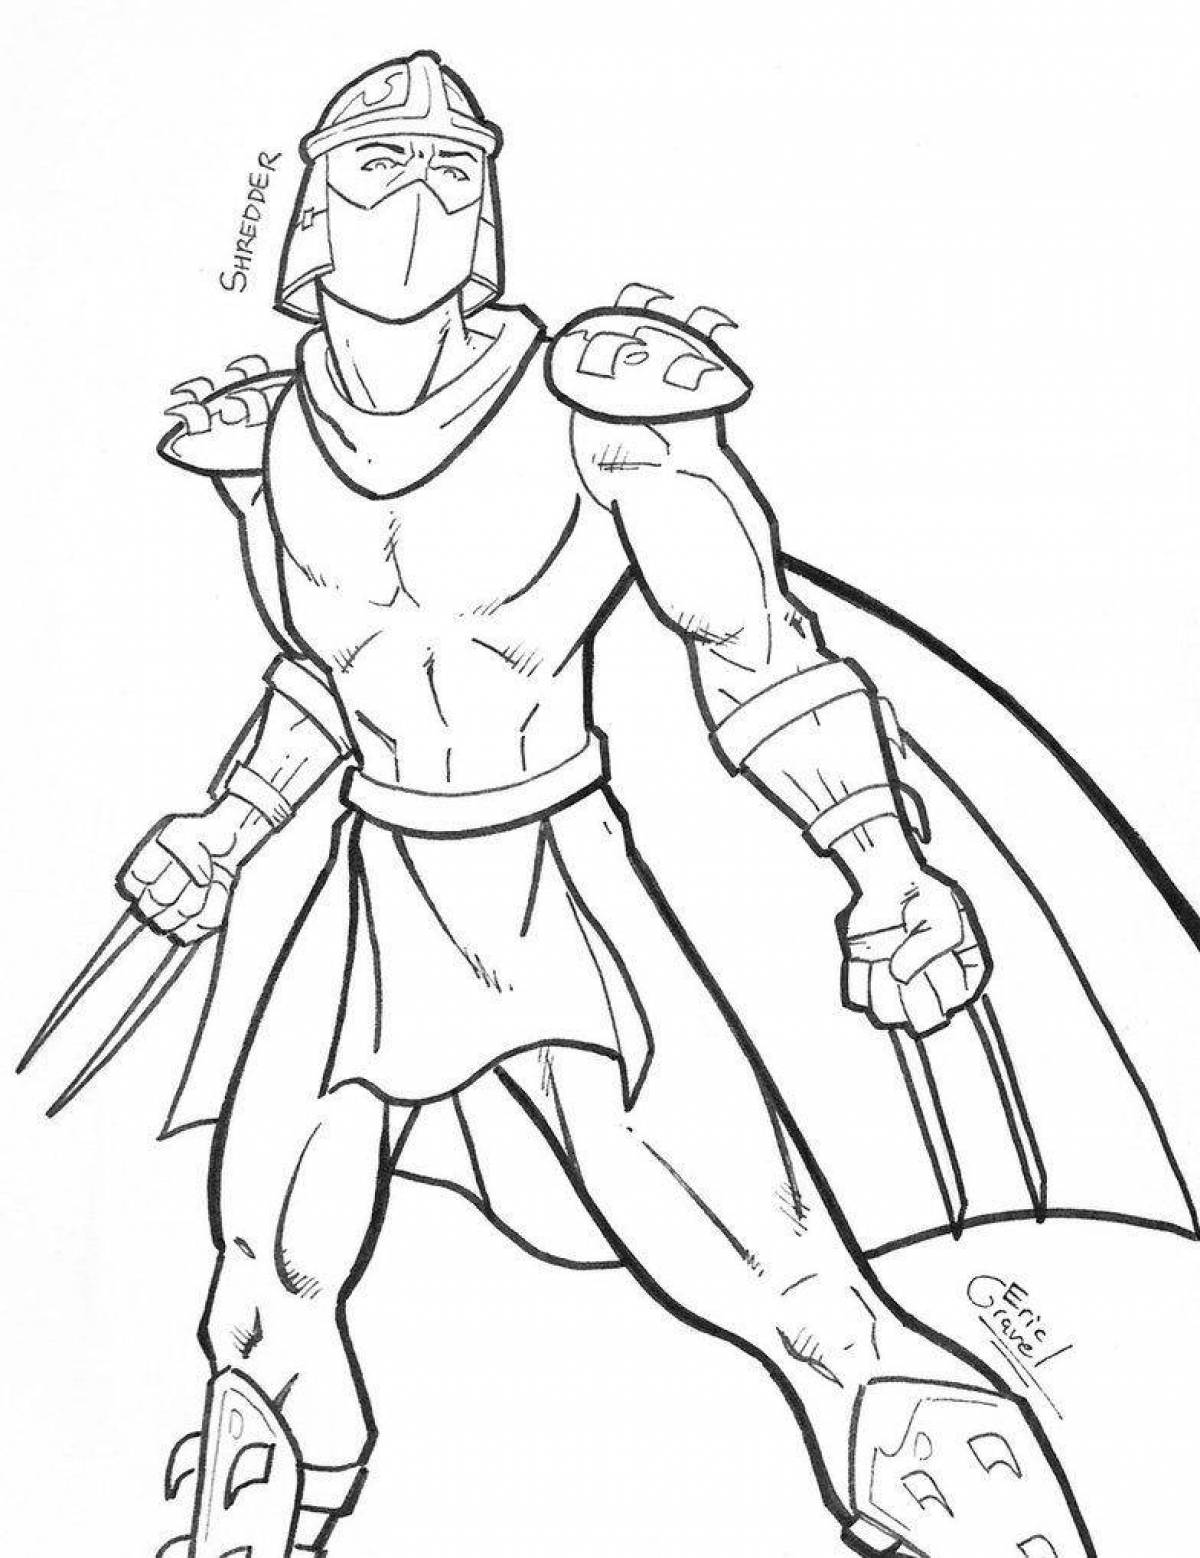 Bright shredder coloring page